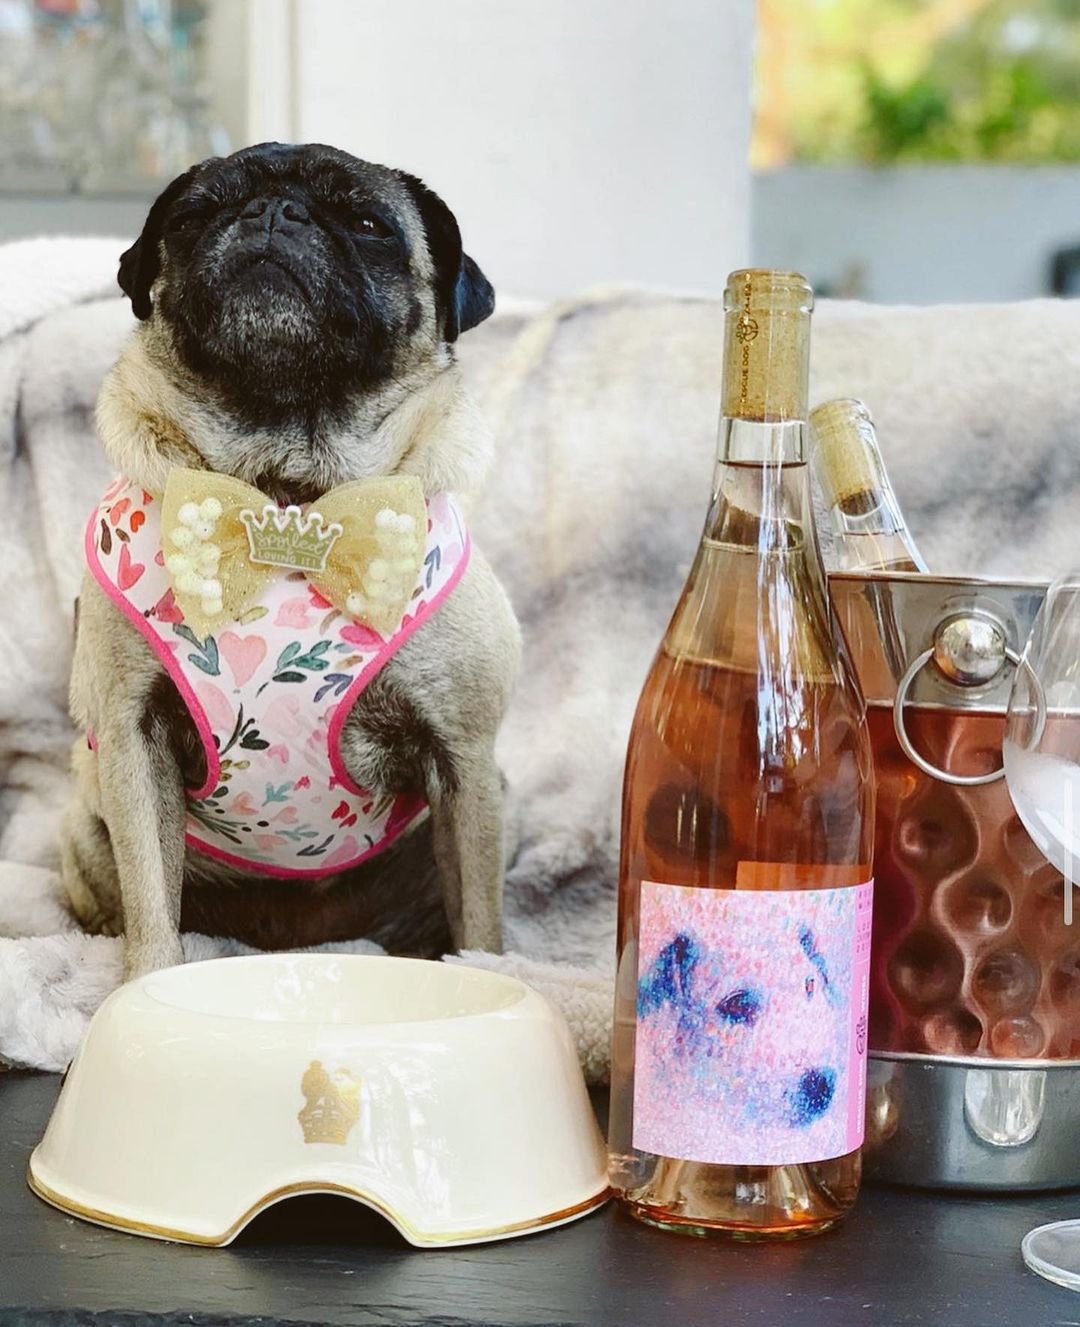 Blacka nd white pug sitting on a chair and a wine on the table